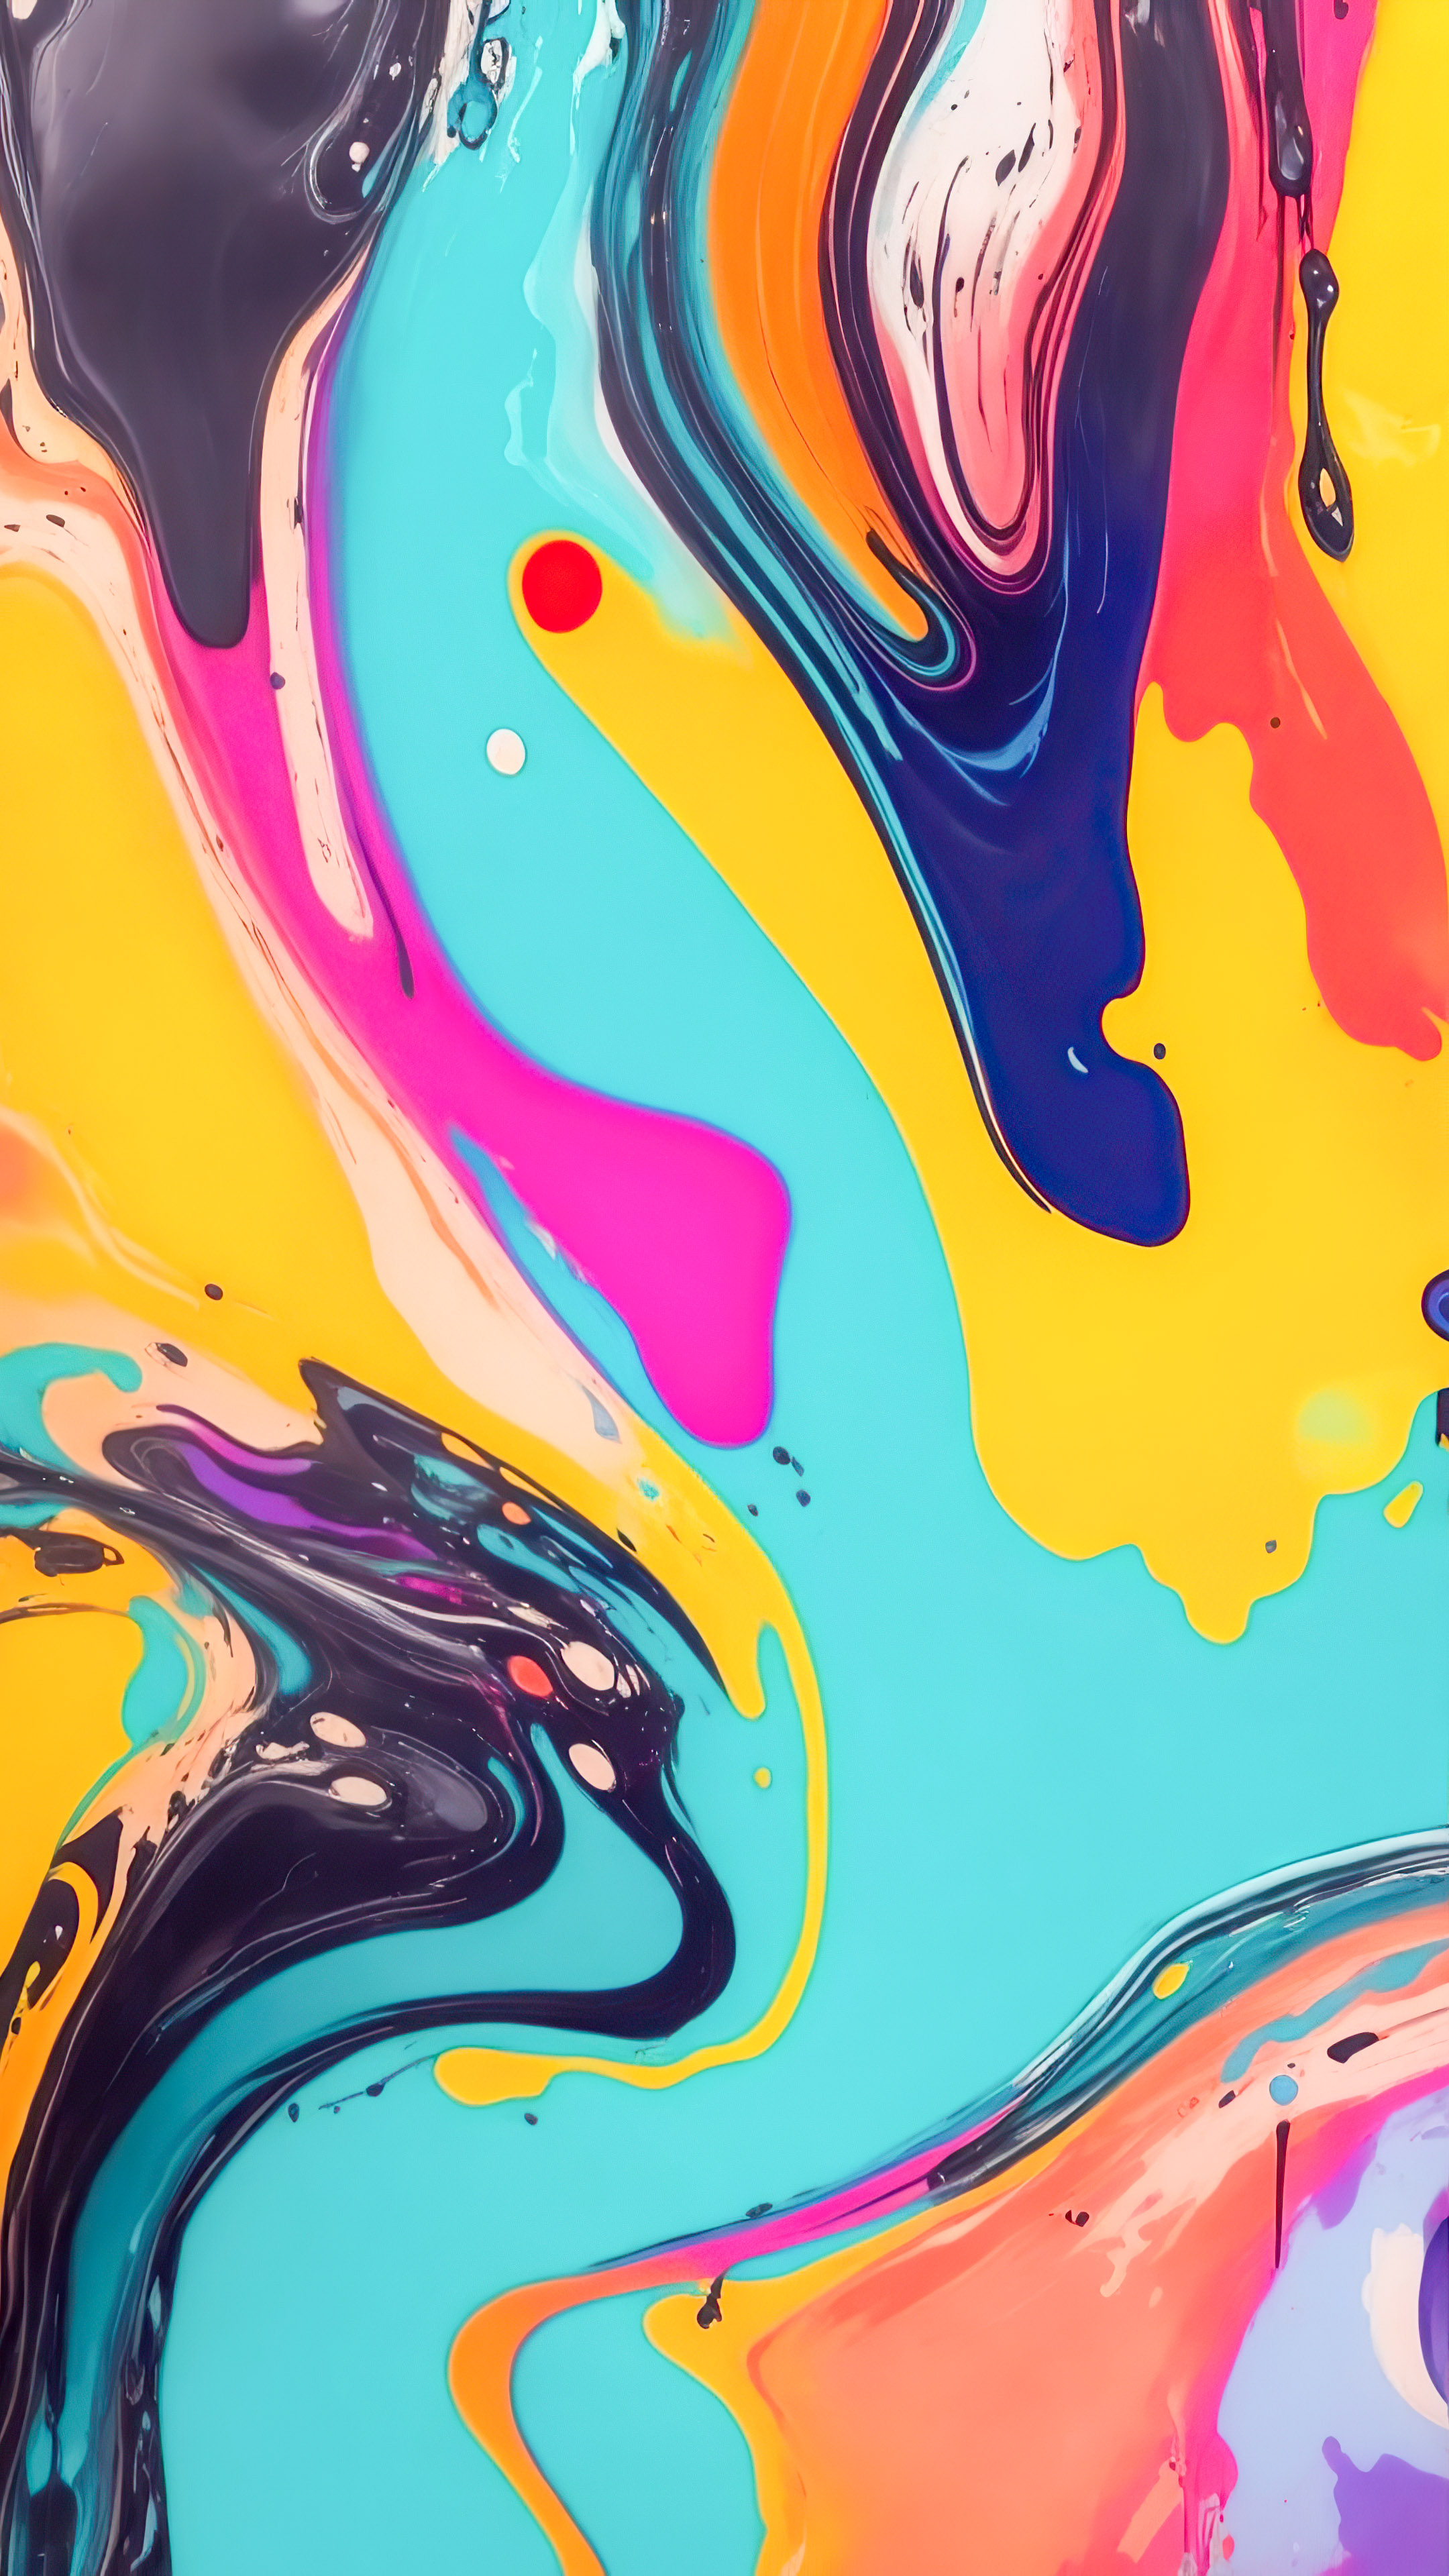 Immerse yourself in the dynamic allure of abstract wallpaper 4k for android, featuring rhythmic and chaotic drips of paint on a canvas.